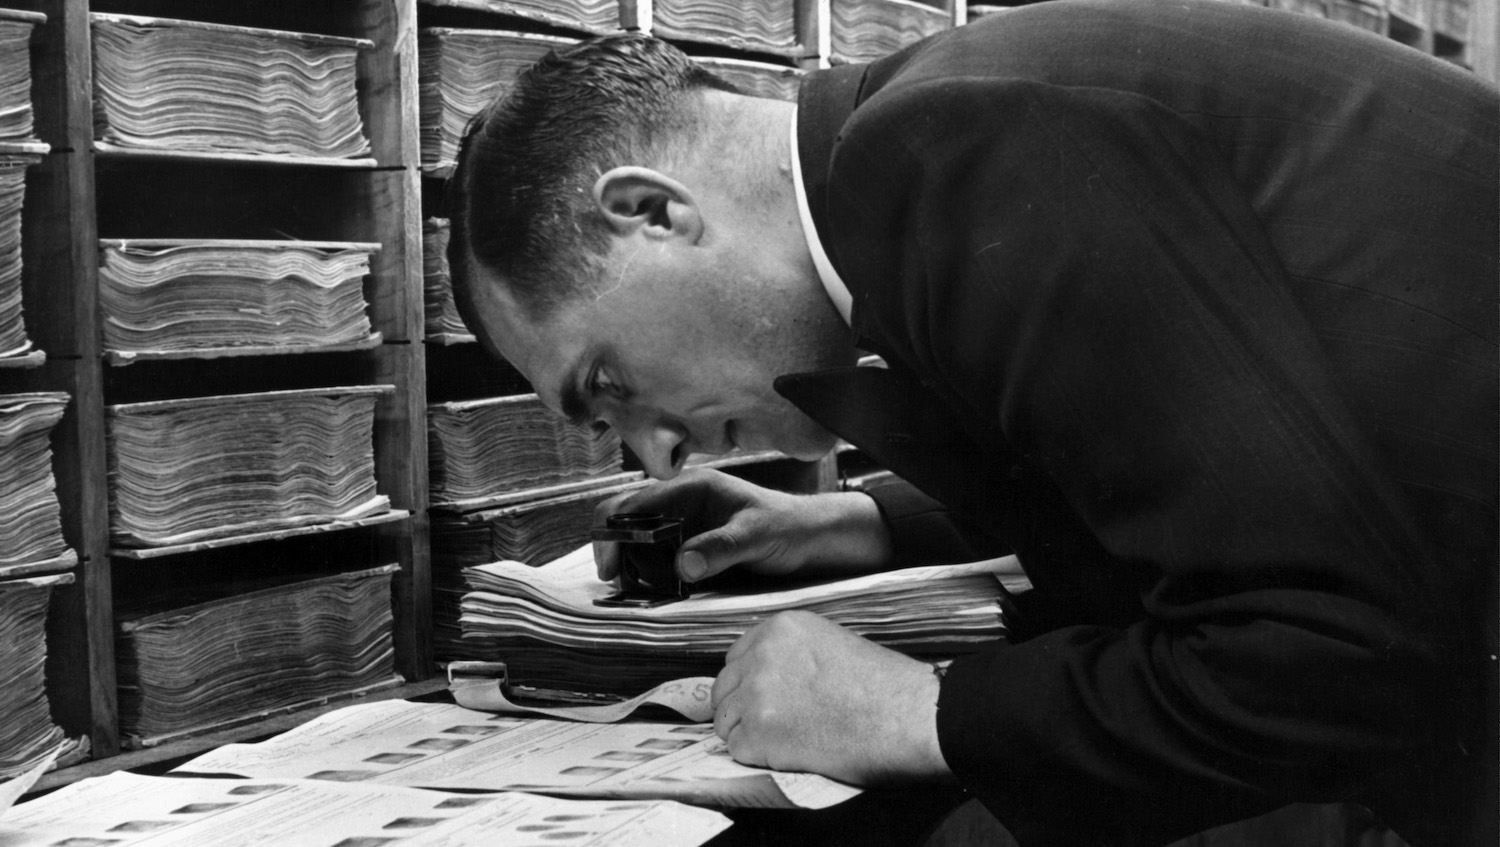 A view as a detective examines fingerprints in the Finger Department at Scotland Yard in London, England. Circa 1950. (Photo by Pictorial Parade/Archive Photos/Getty Images)